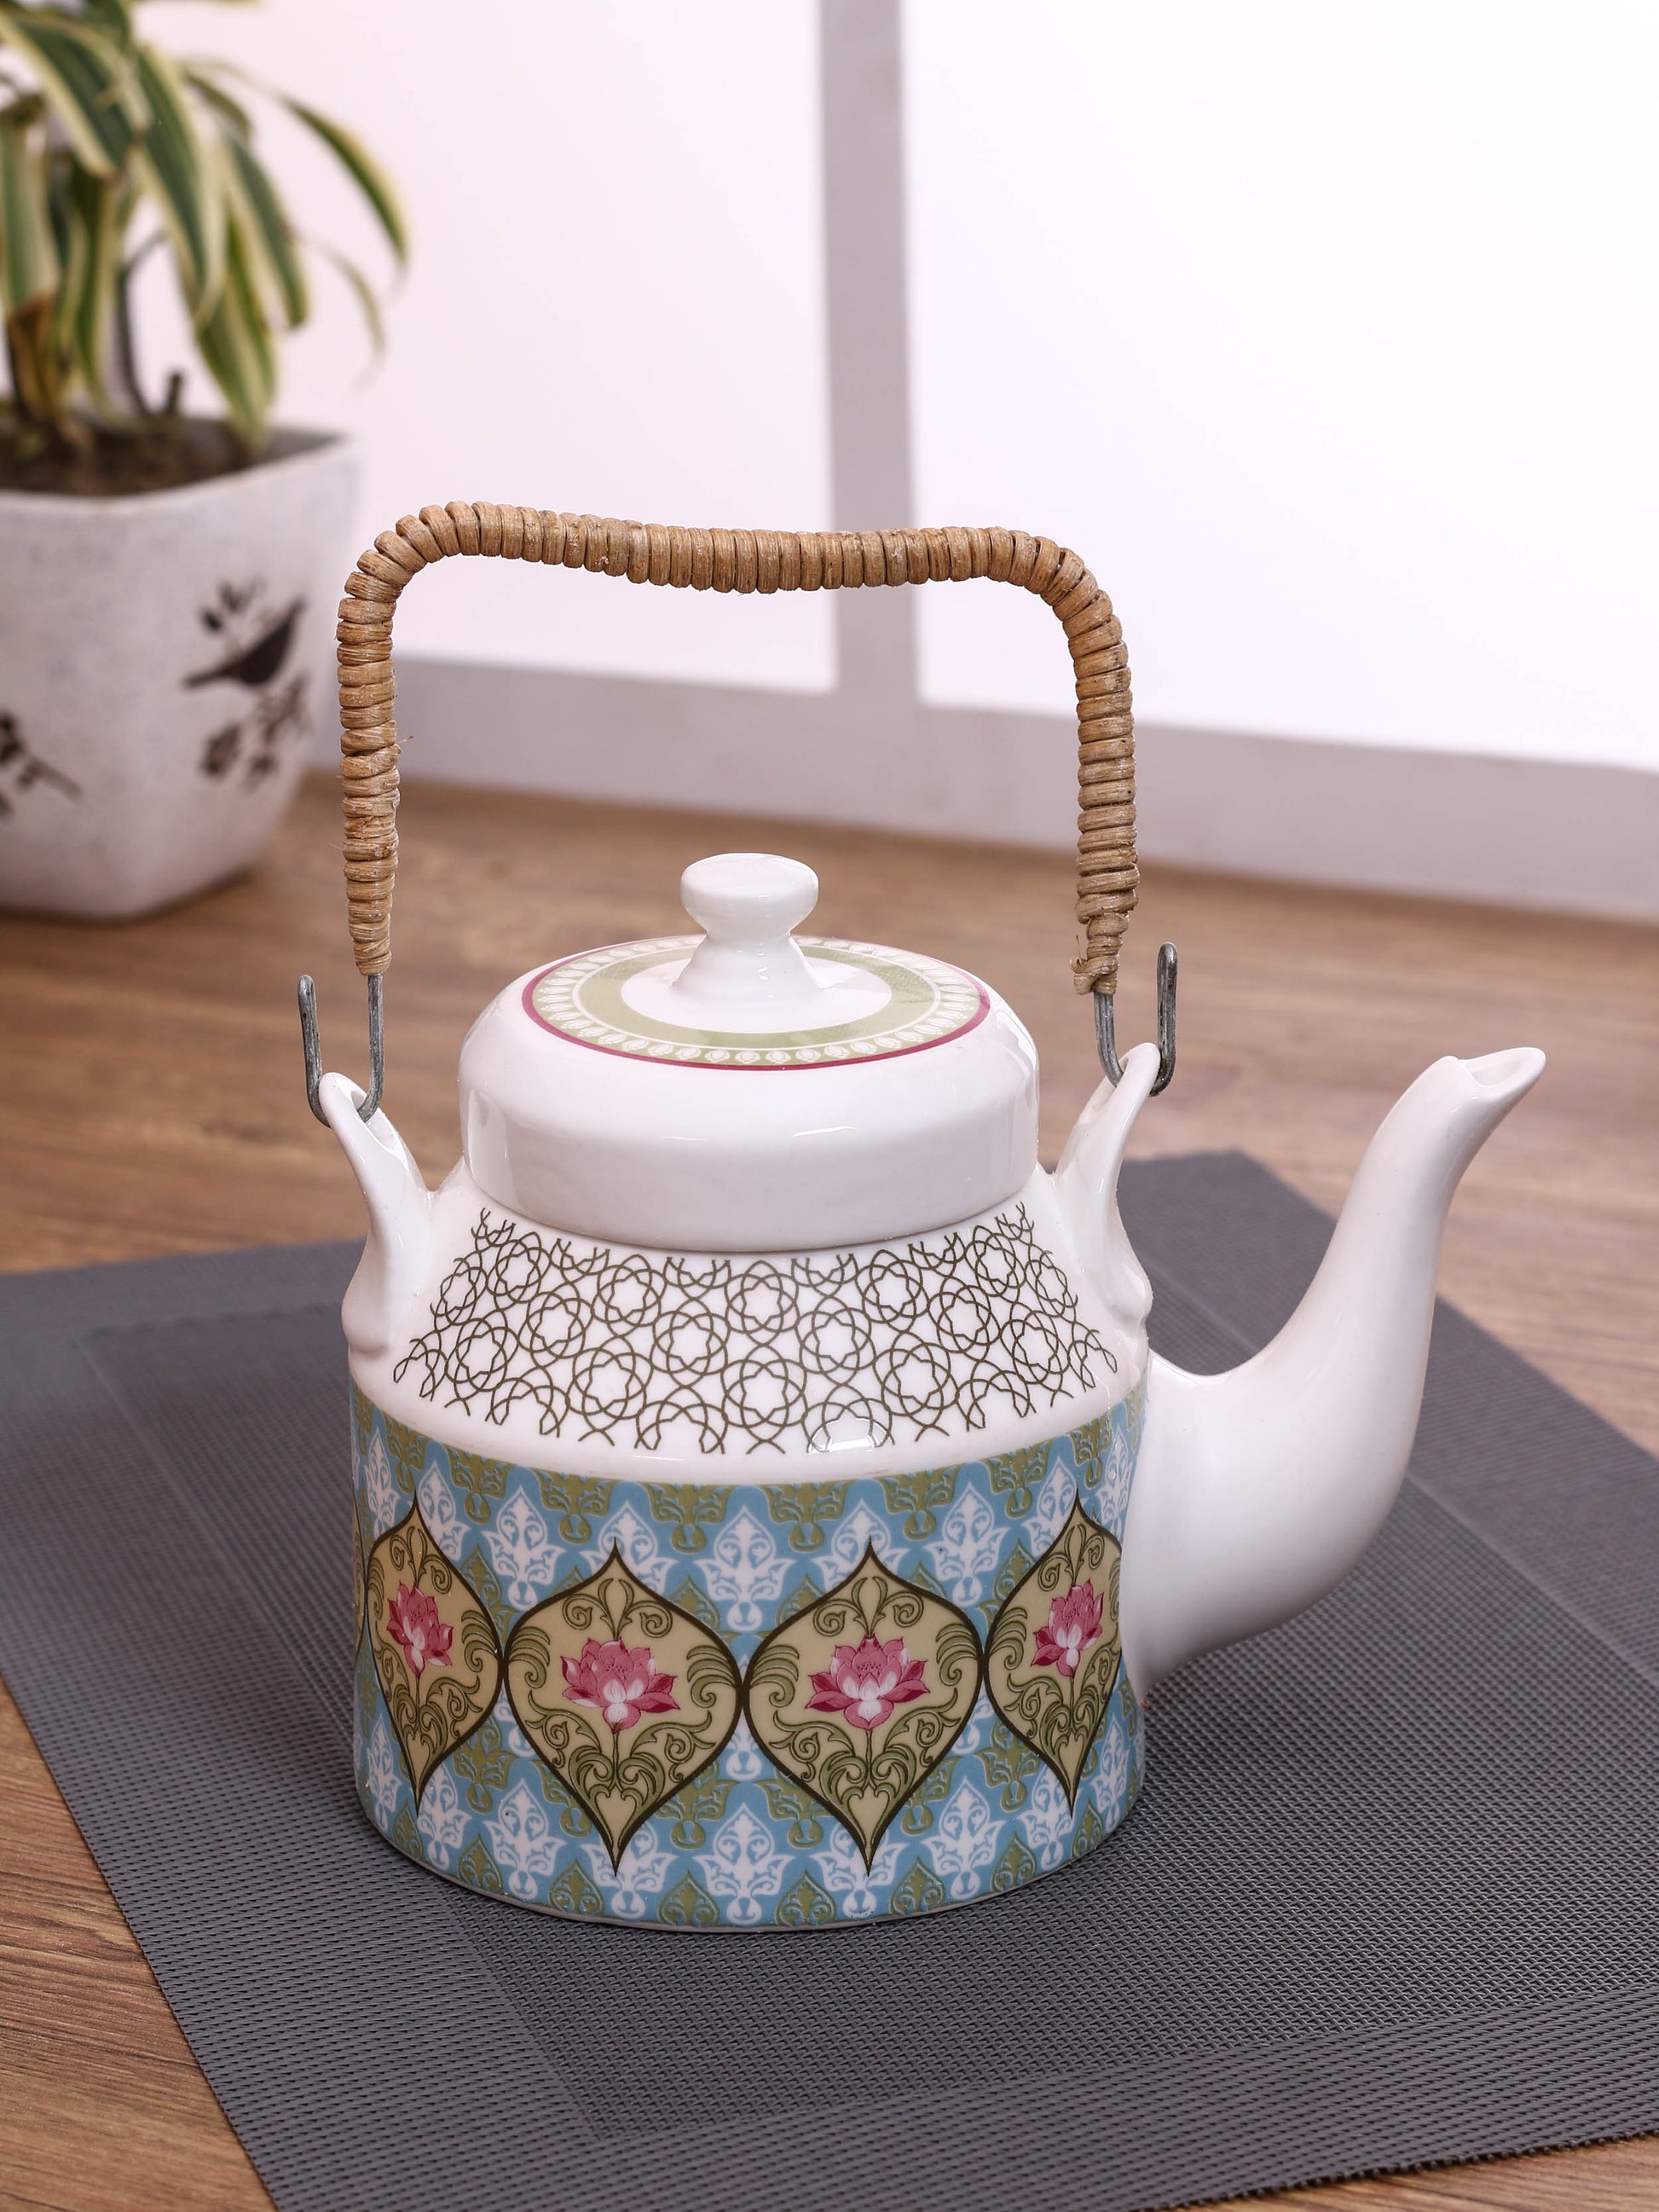 The story of the desi kettle